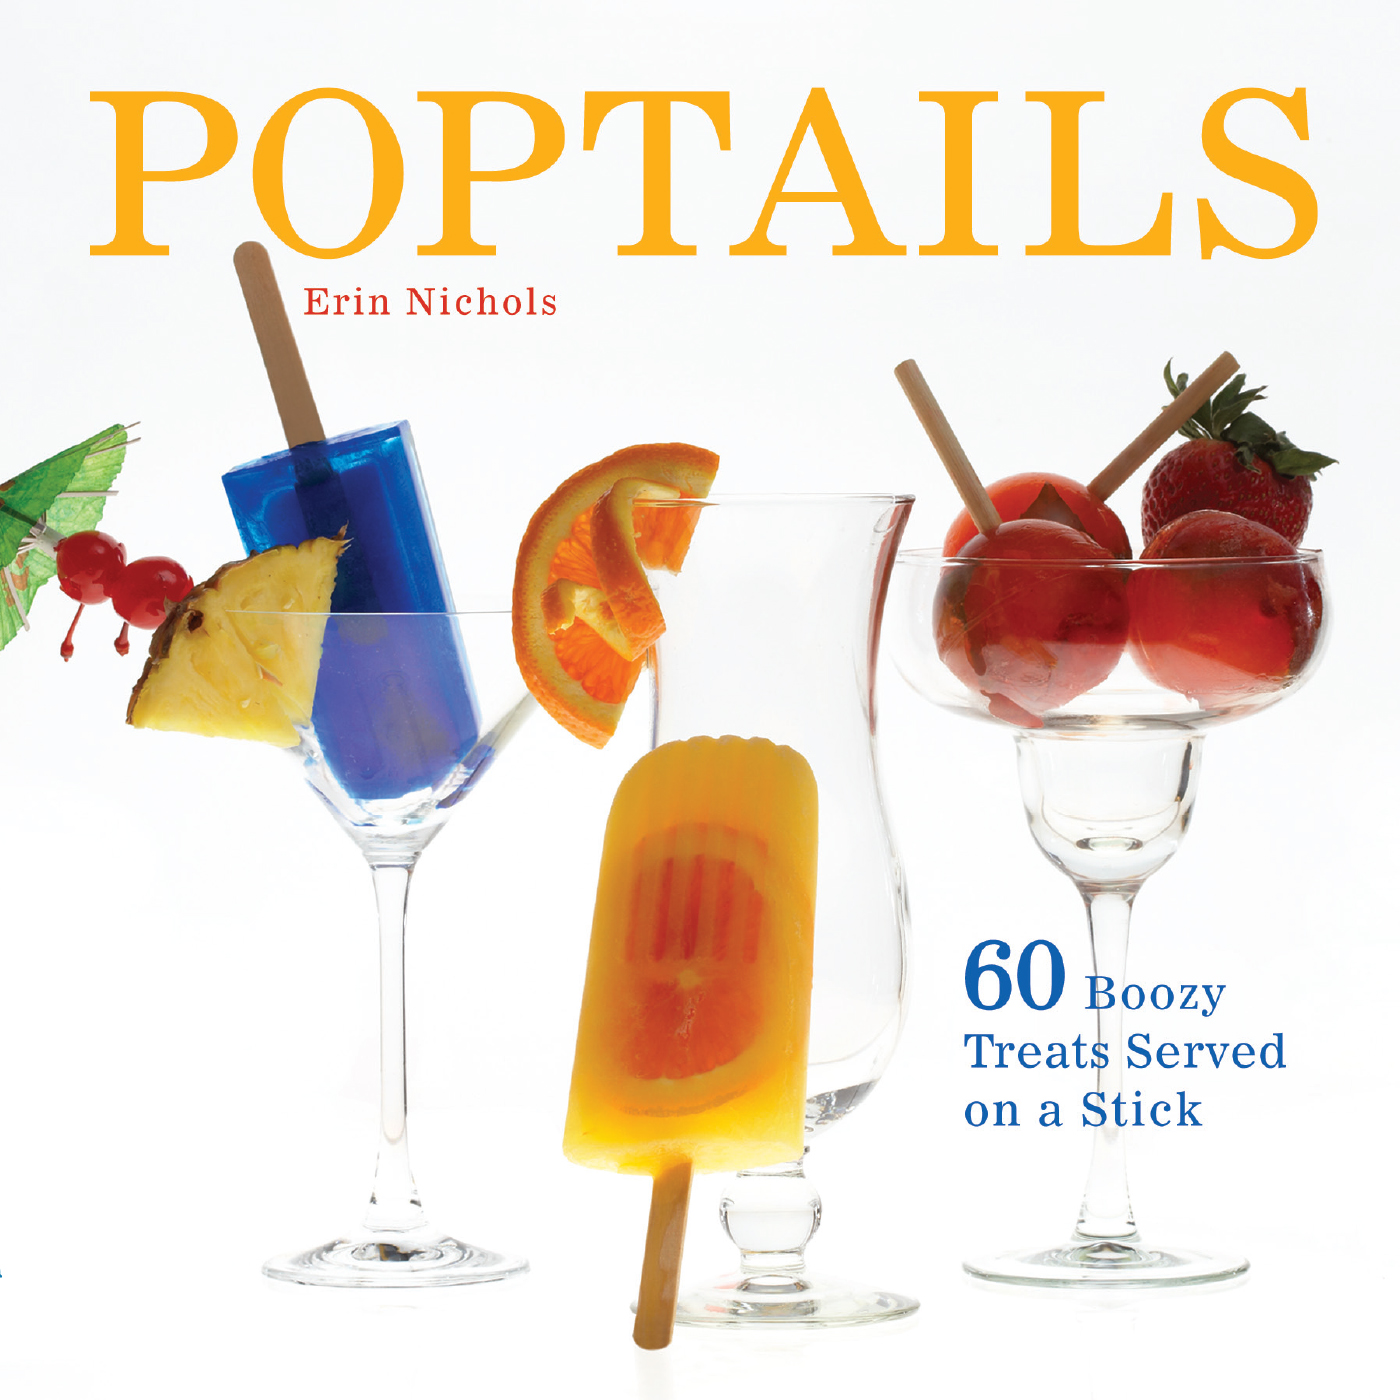 poptails-cov.indd